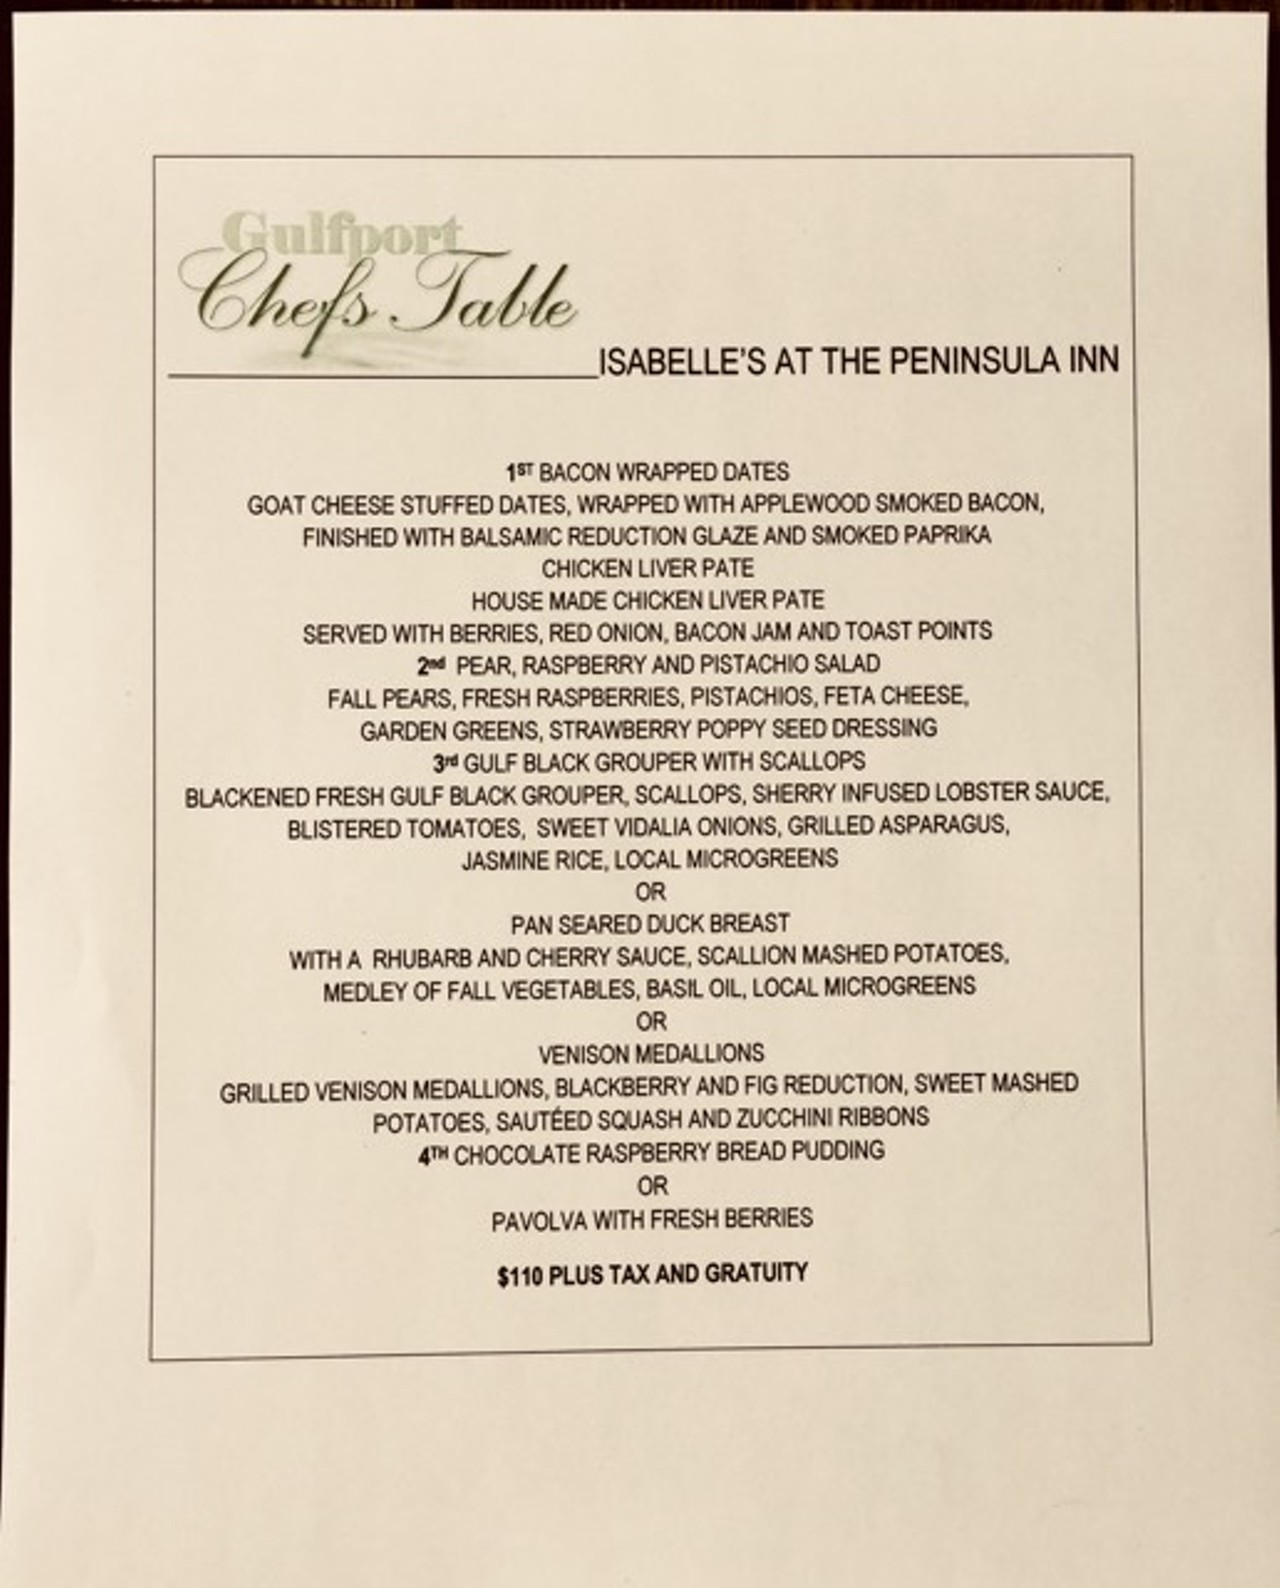 Gulfport Chef's Table 2018 Isabelle's at the Peninsula Inn menu